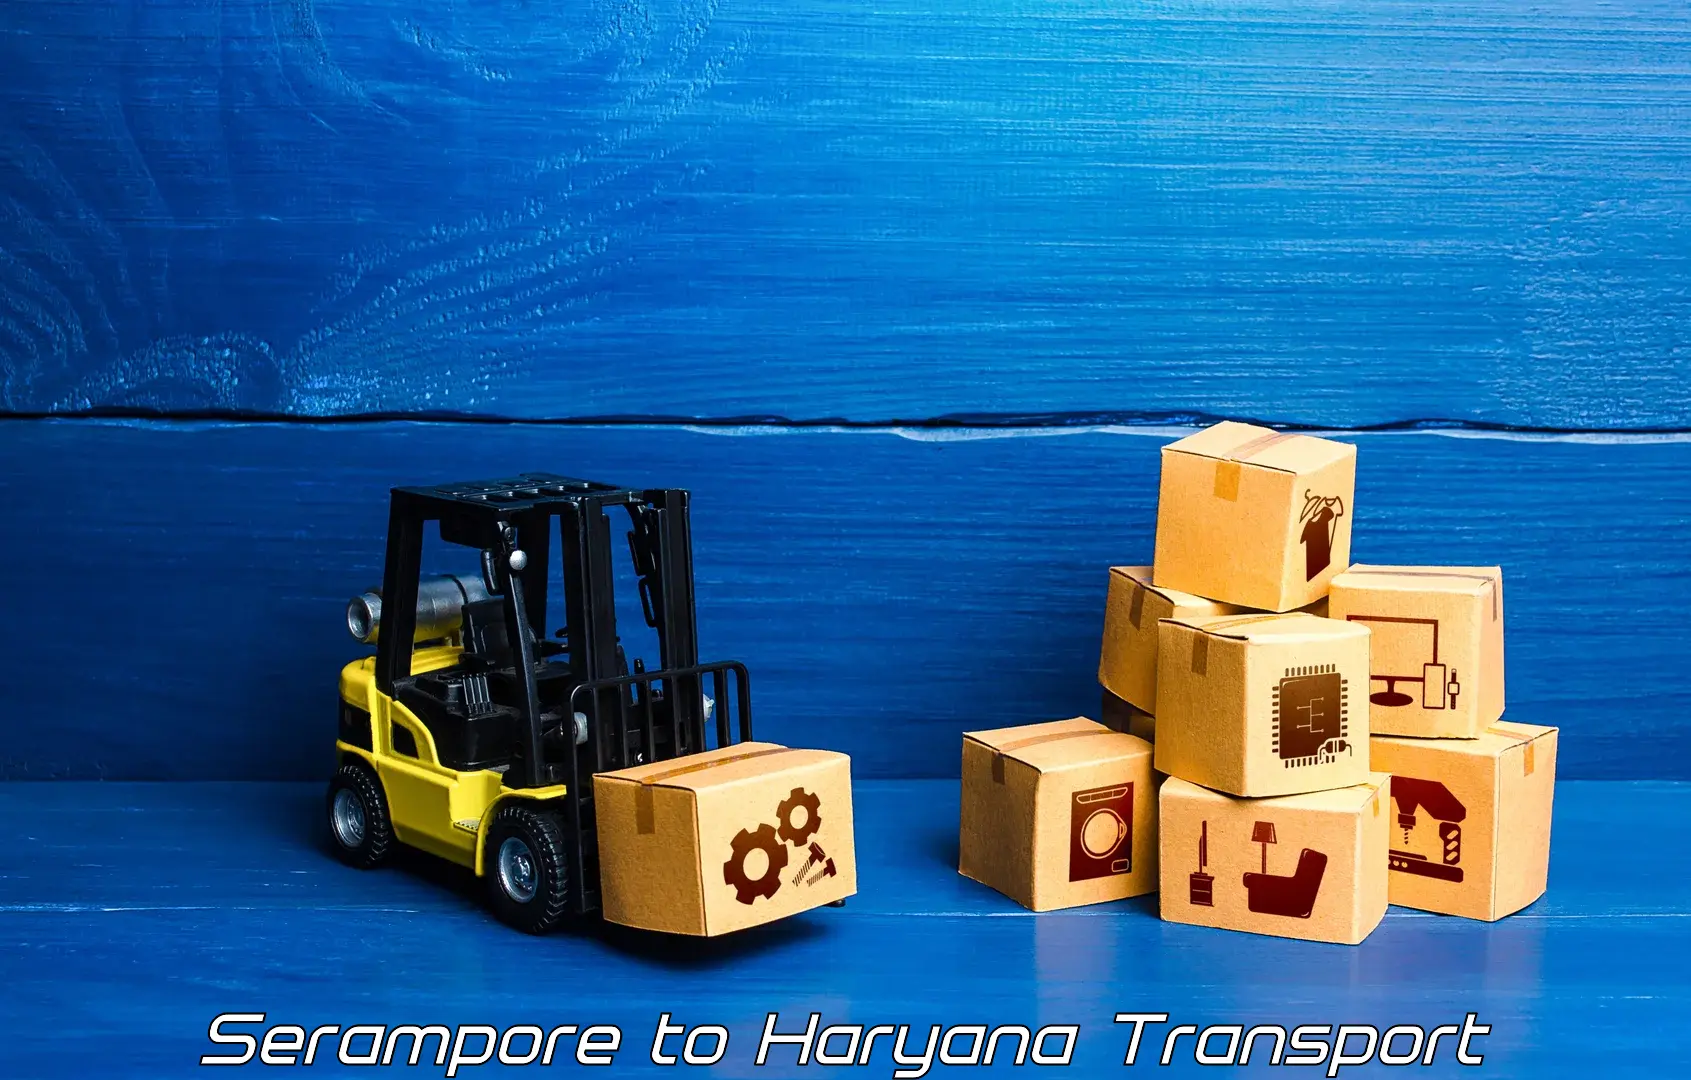 Container transportation services Serampore to Haryana